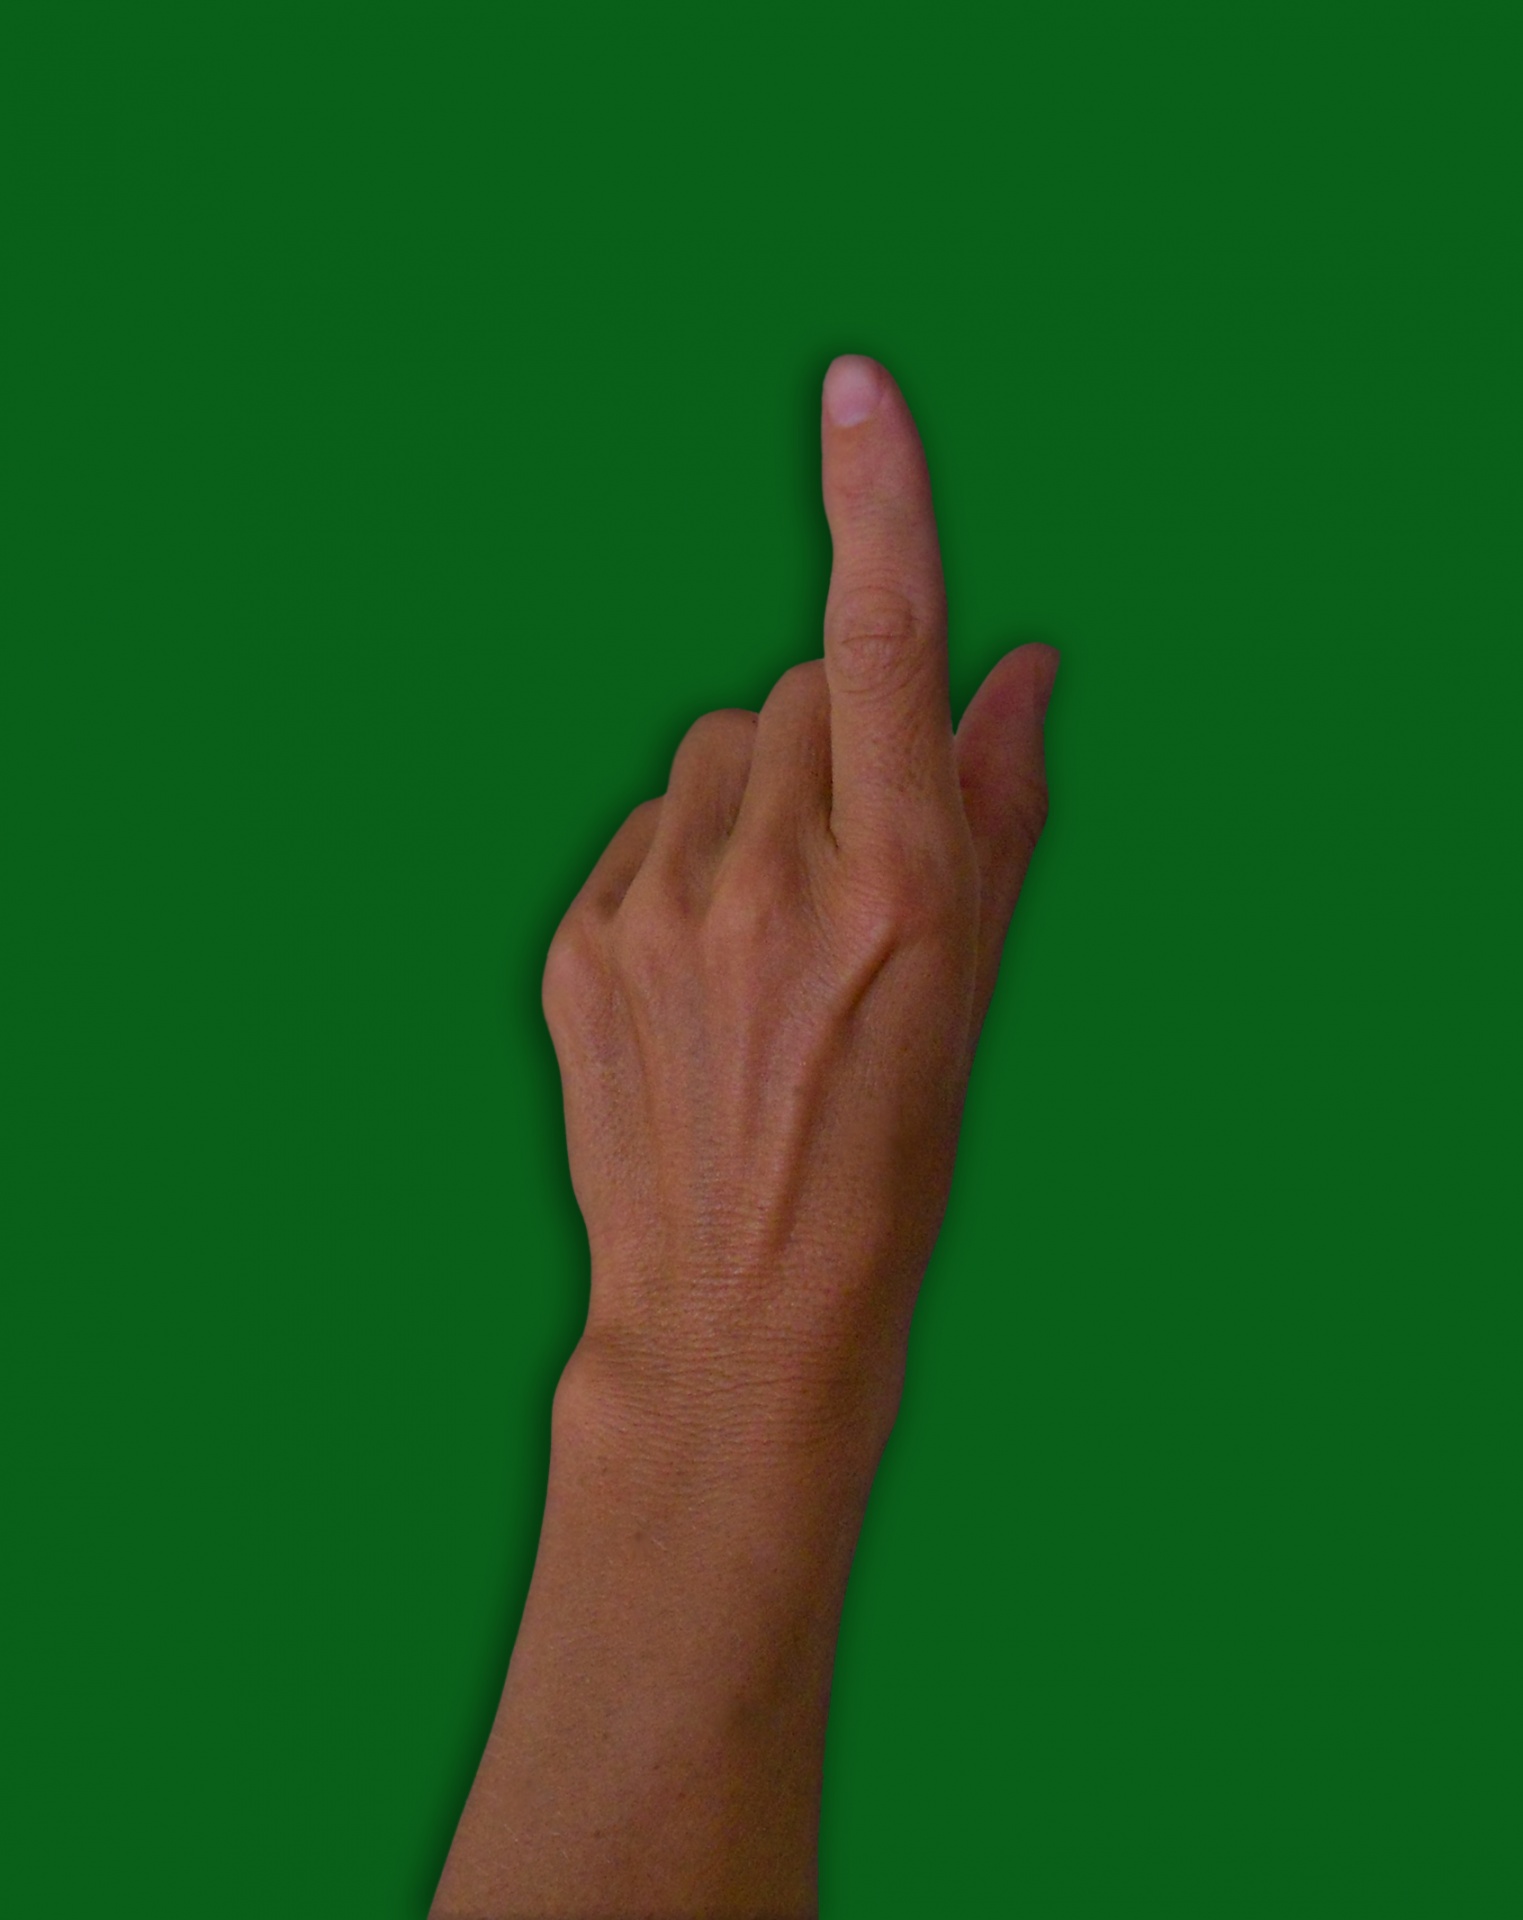 pointing hand on a green background